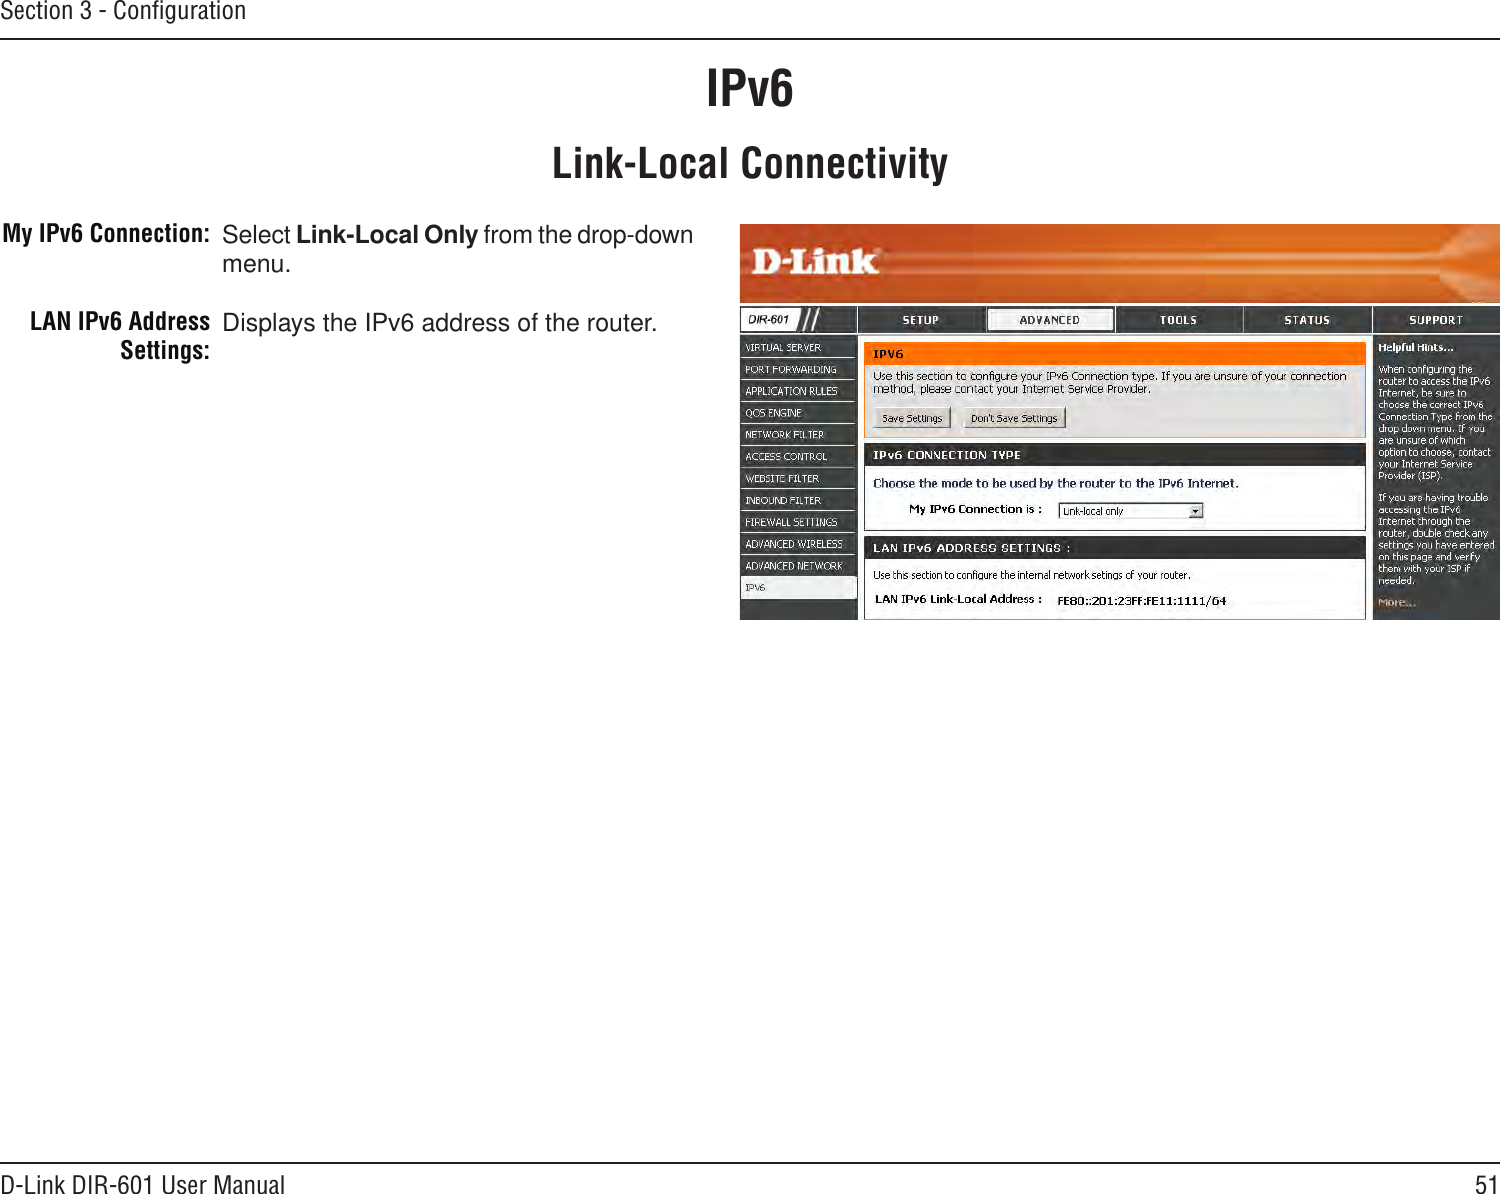 51D-Link DIR-601 User ManualSection 3 - ConﬁgurationIPv6Select Link-Local Only from the drop-down menu.Displays the IPv6 address of the router.My IPv6 Connection:LAN IPv6 Address Settings:Link-Local Connectivity